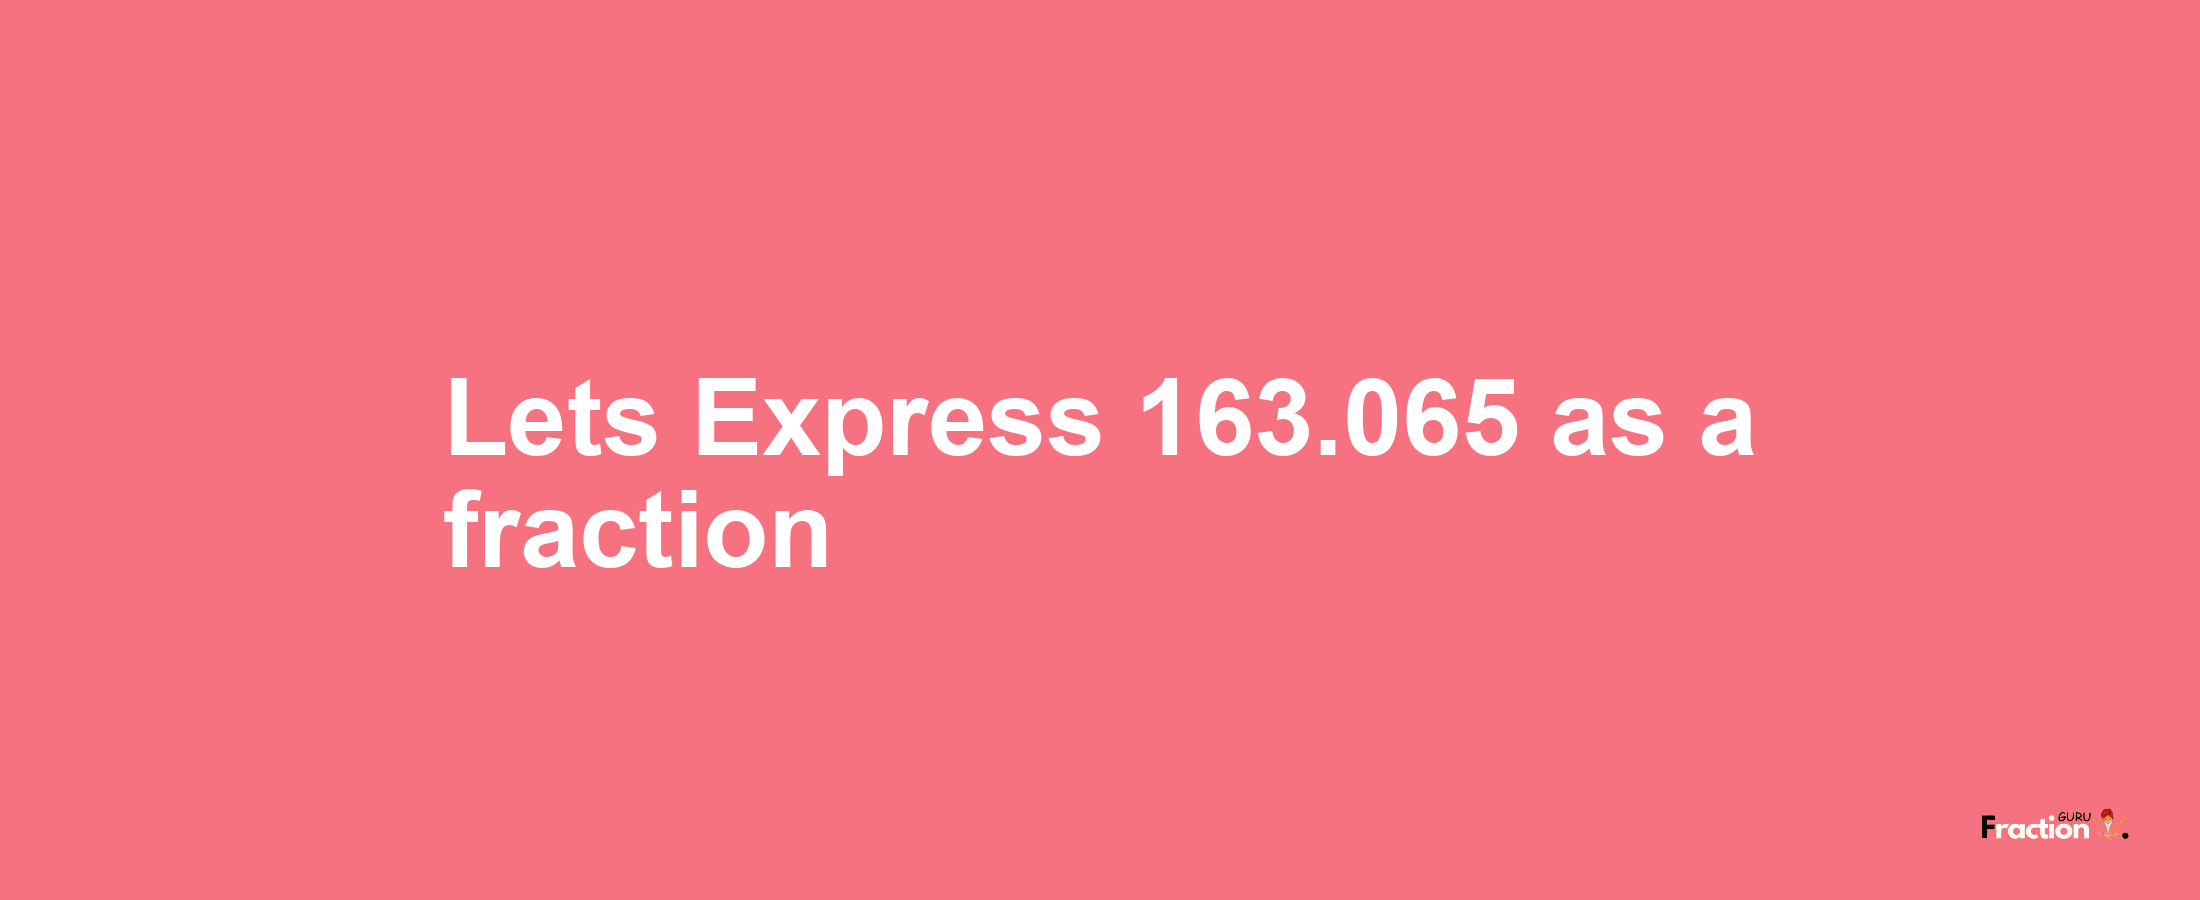 Lets Express 163.065 as afraction